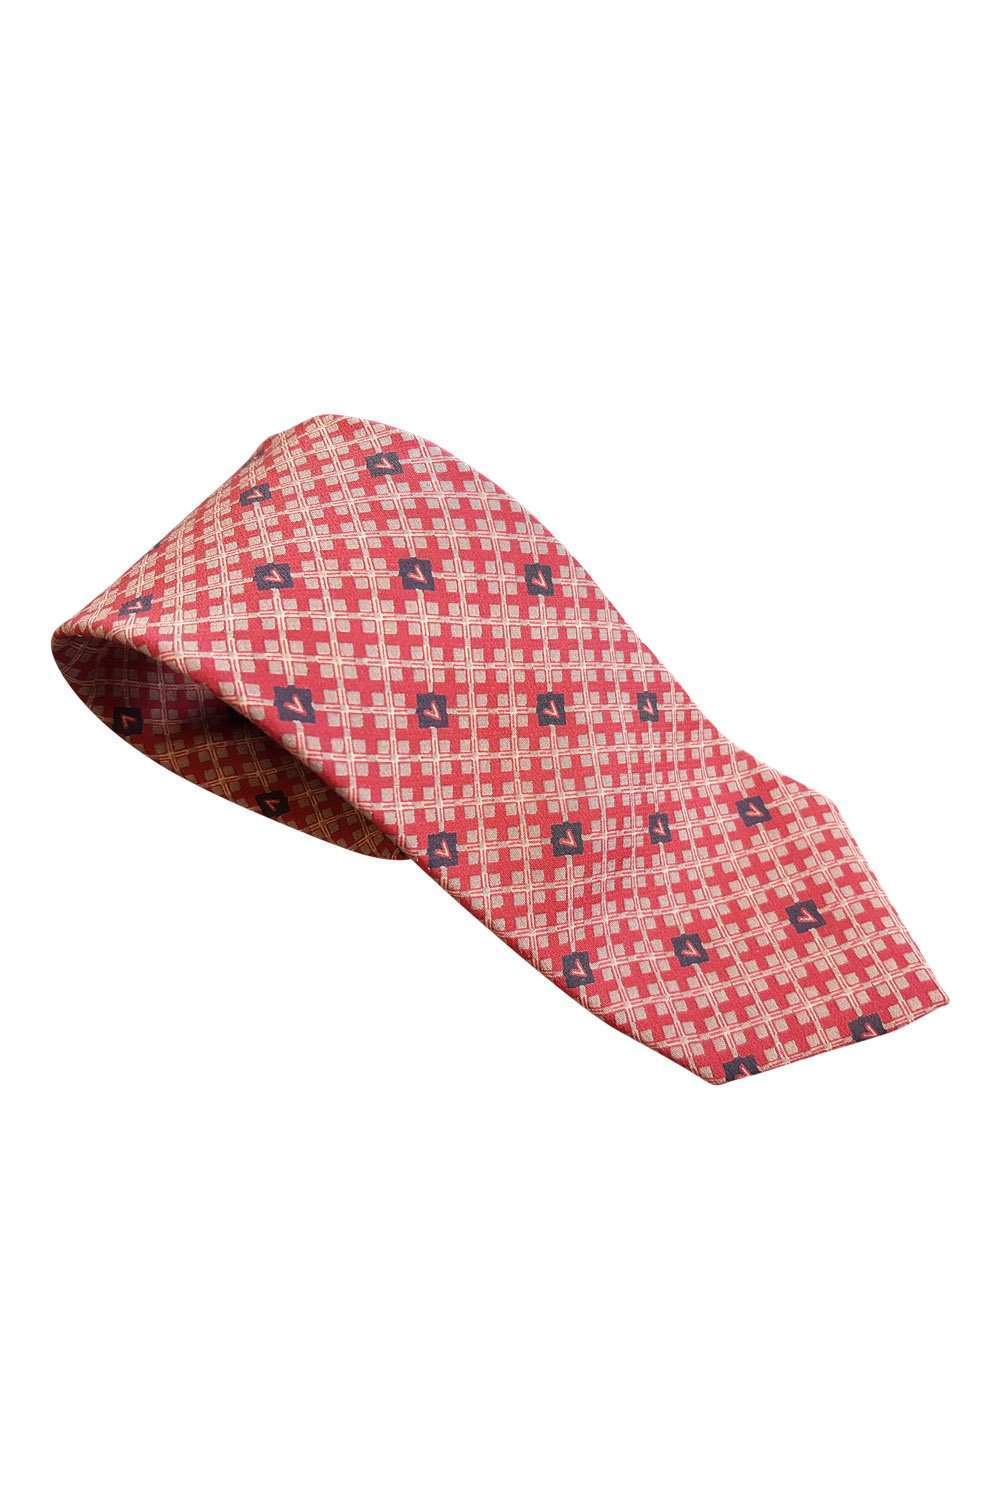 VALENTINO Vintage Silk Red Tie With Grey Argyle Print Repeat-Valentino-The Freperie